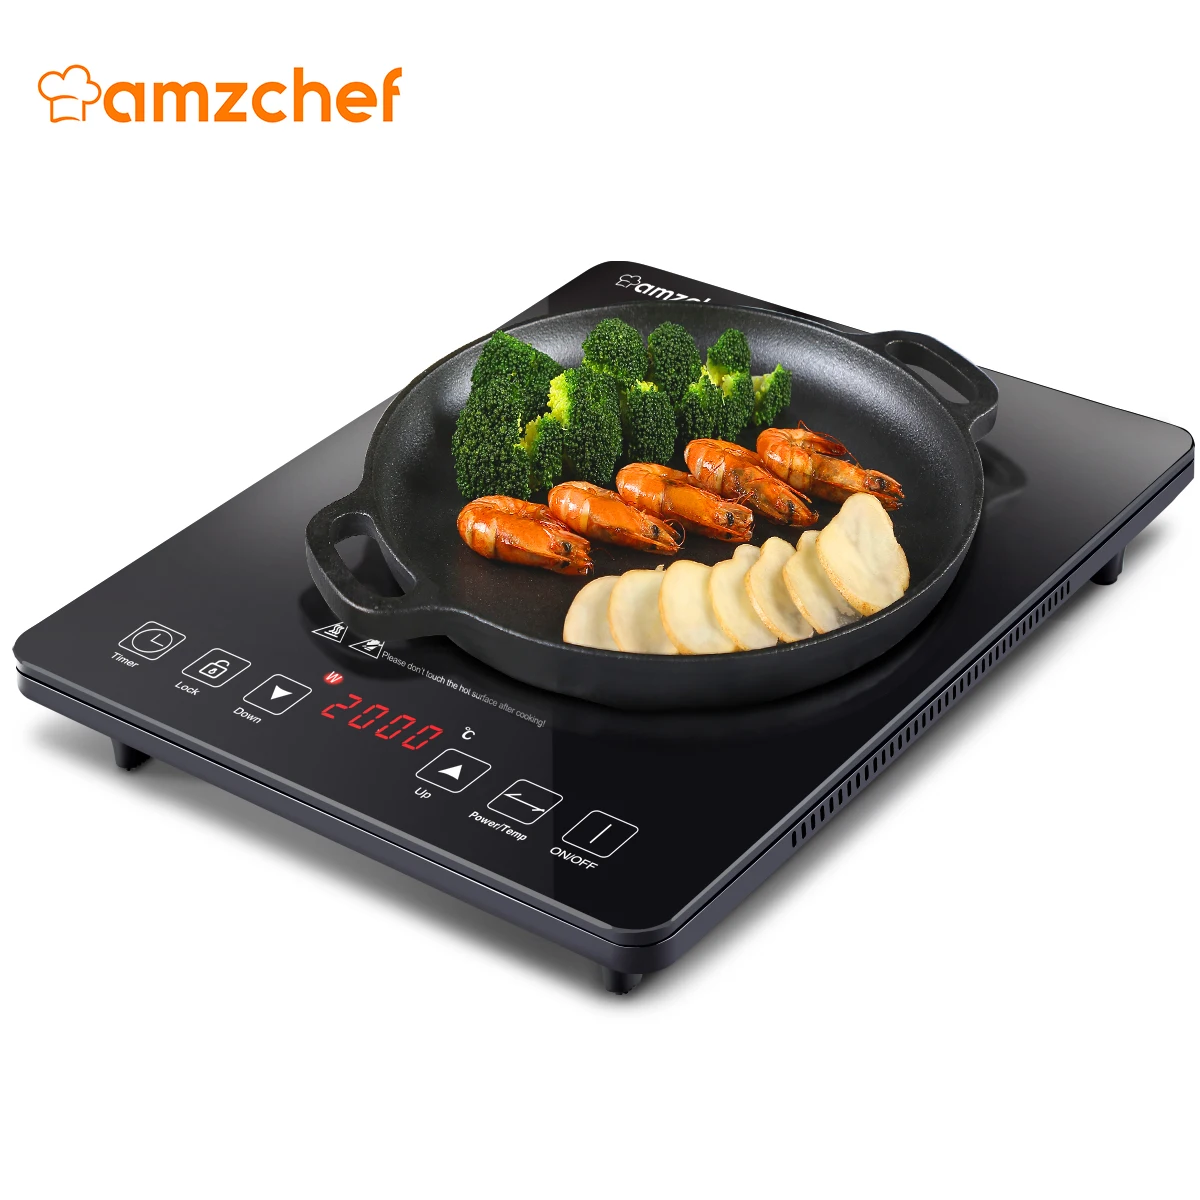 Amzchef Induction Cooker 2000W Electric induction cooktop adjustable Temperature hob Power Magnetic Cooker Hot Plates SK-CB16